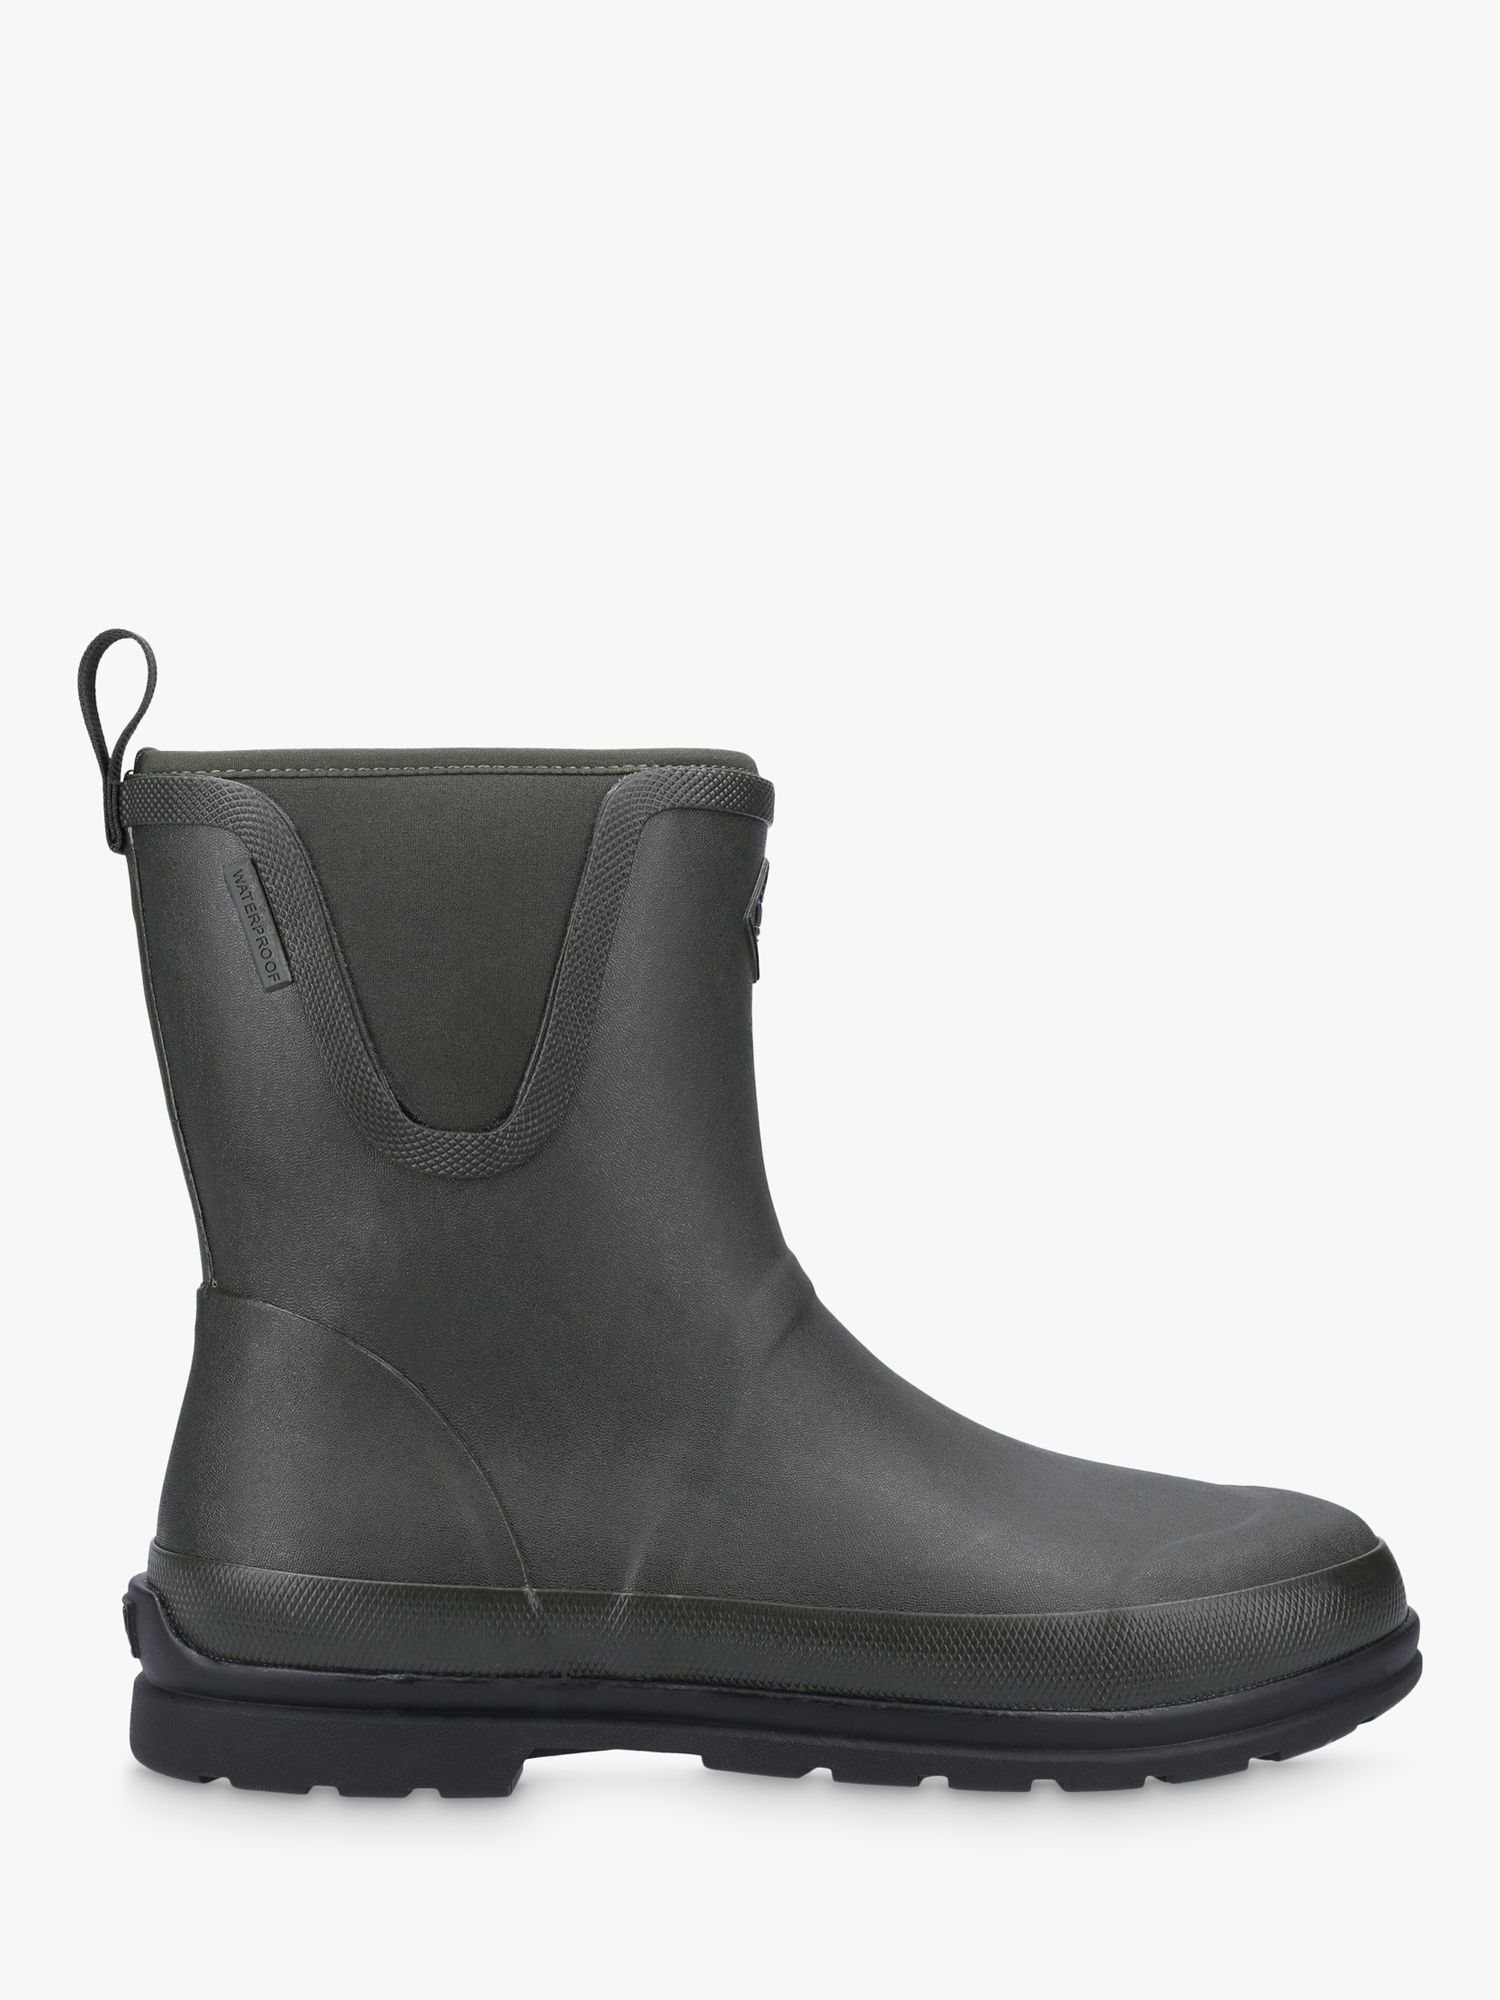 Muck Originals Pull On Mid Wellington Boots, Moss at John Lewis & Partners